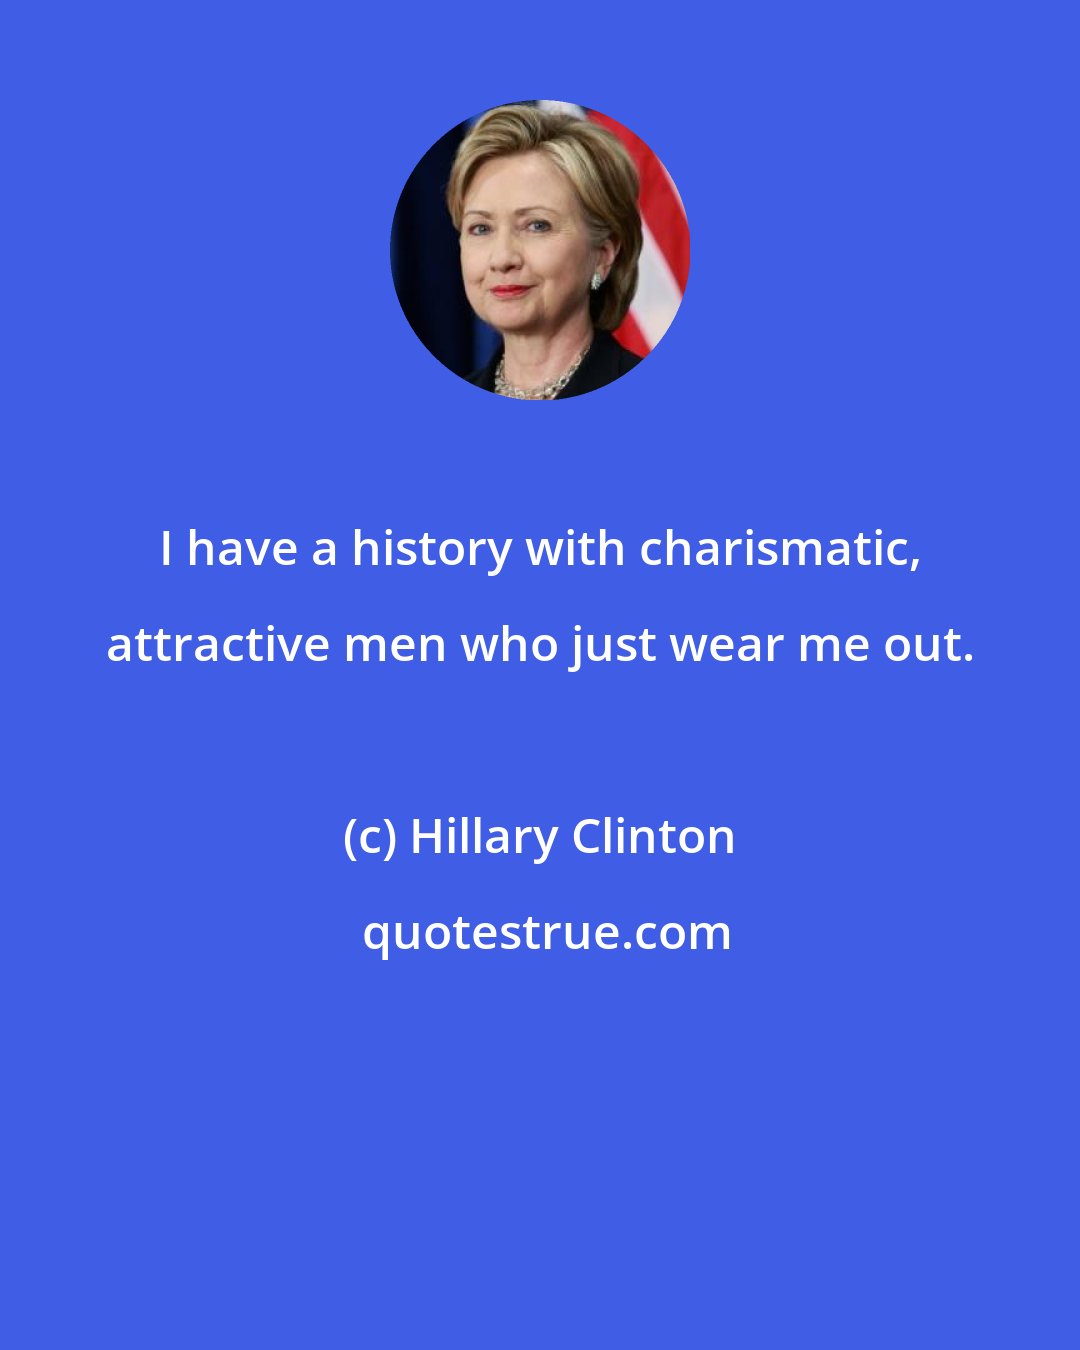 Hillary Clinton: I have a history with charismatic, attractive men who just wear me out.